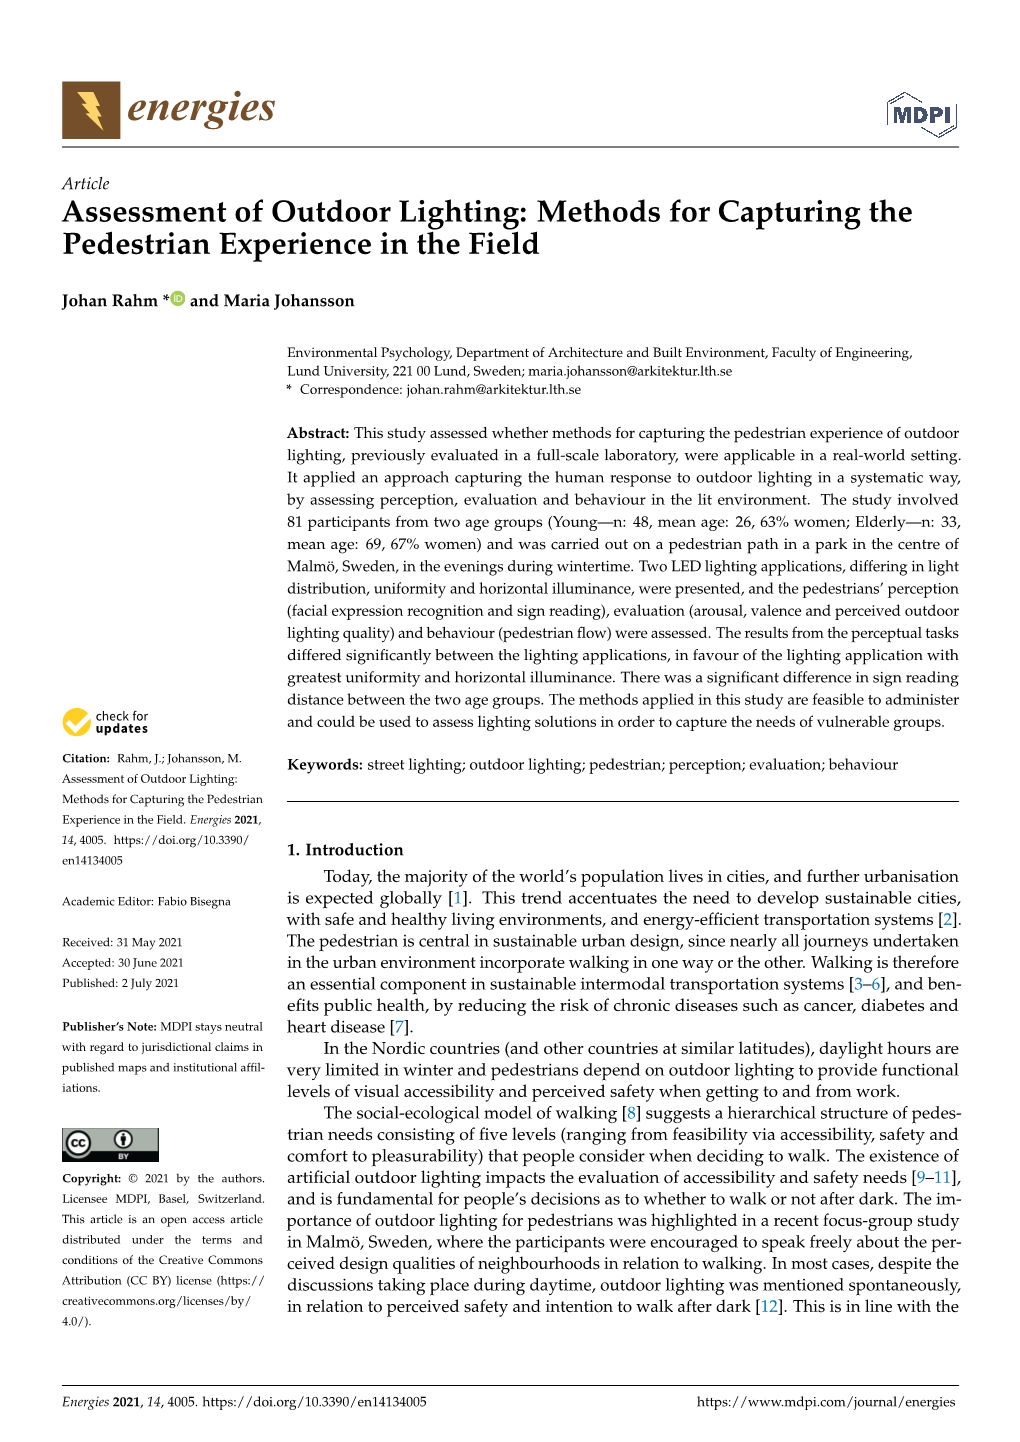 Assessment of Outdoor Lighting: Methods for Capturing the Pedestrian Experience in the Field